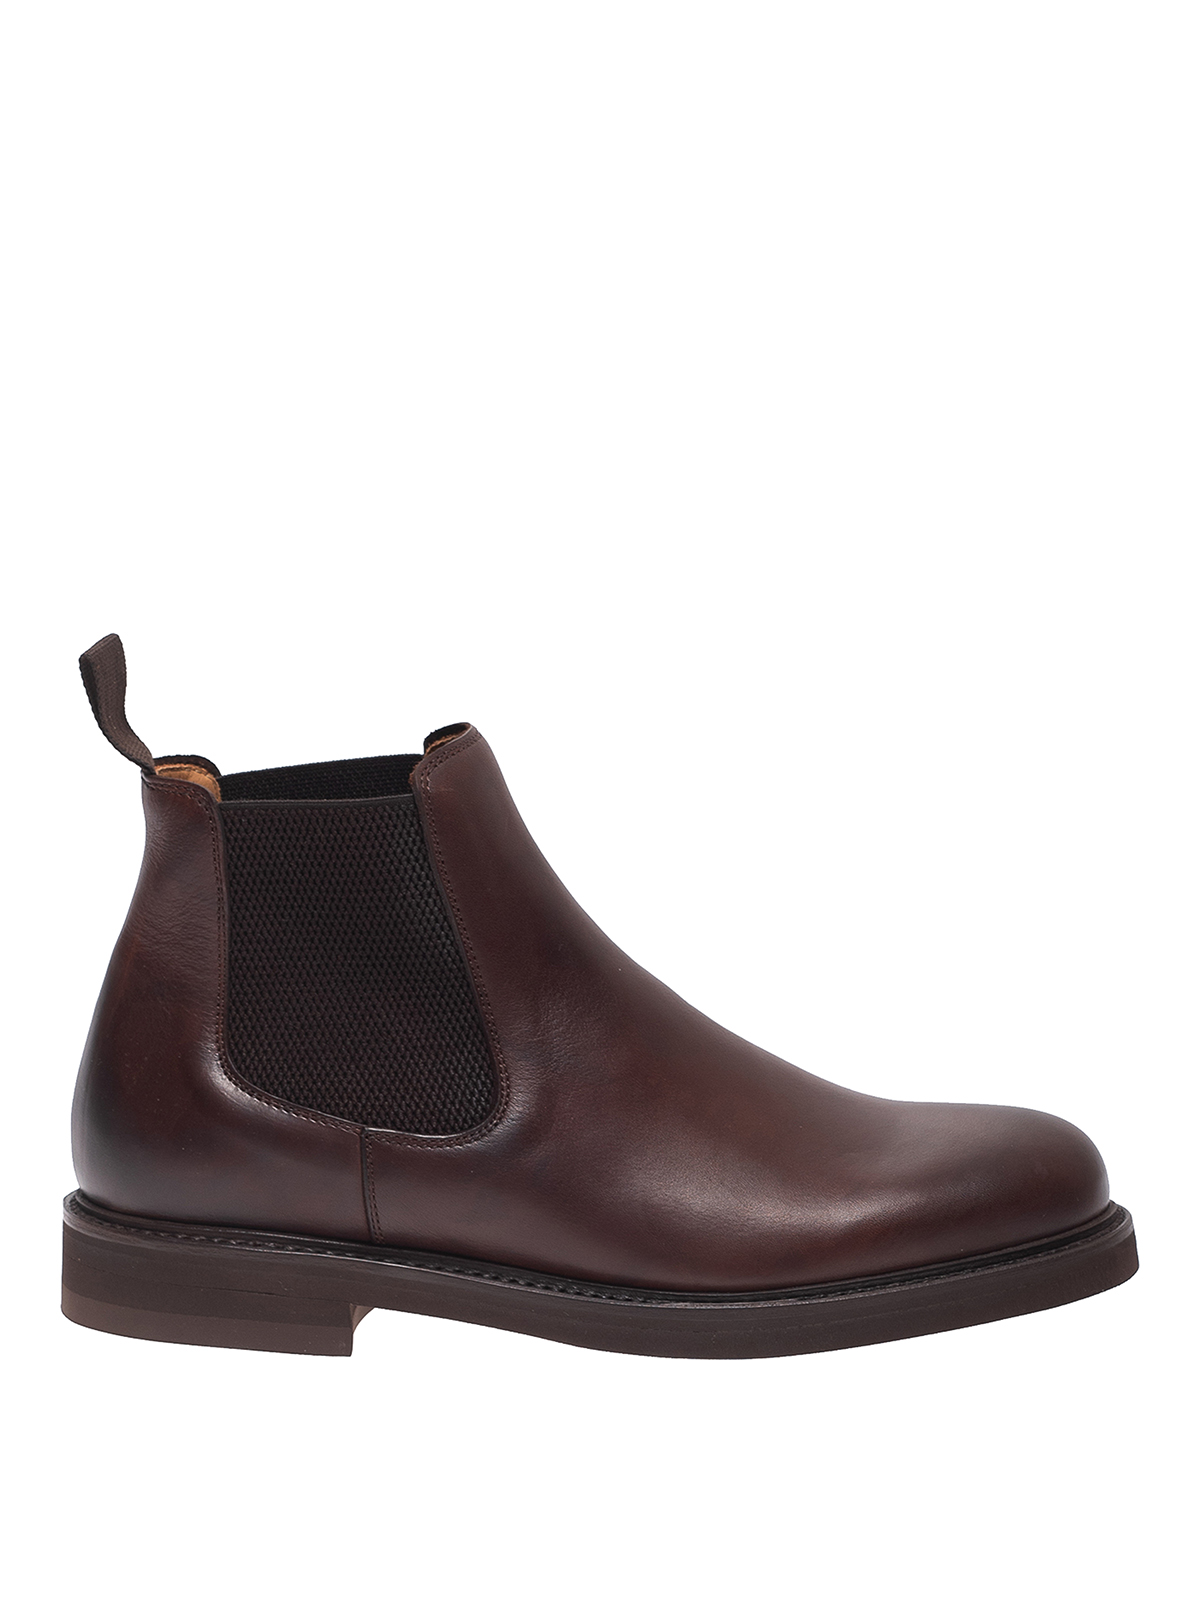 Berwick 1707 Leather Beatle Boots In Brown